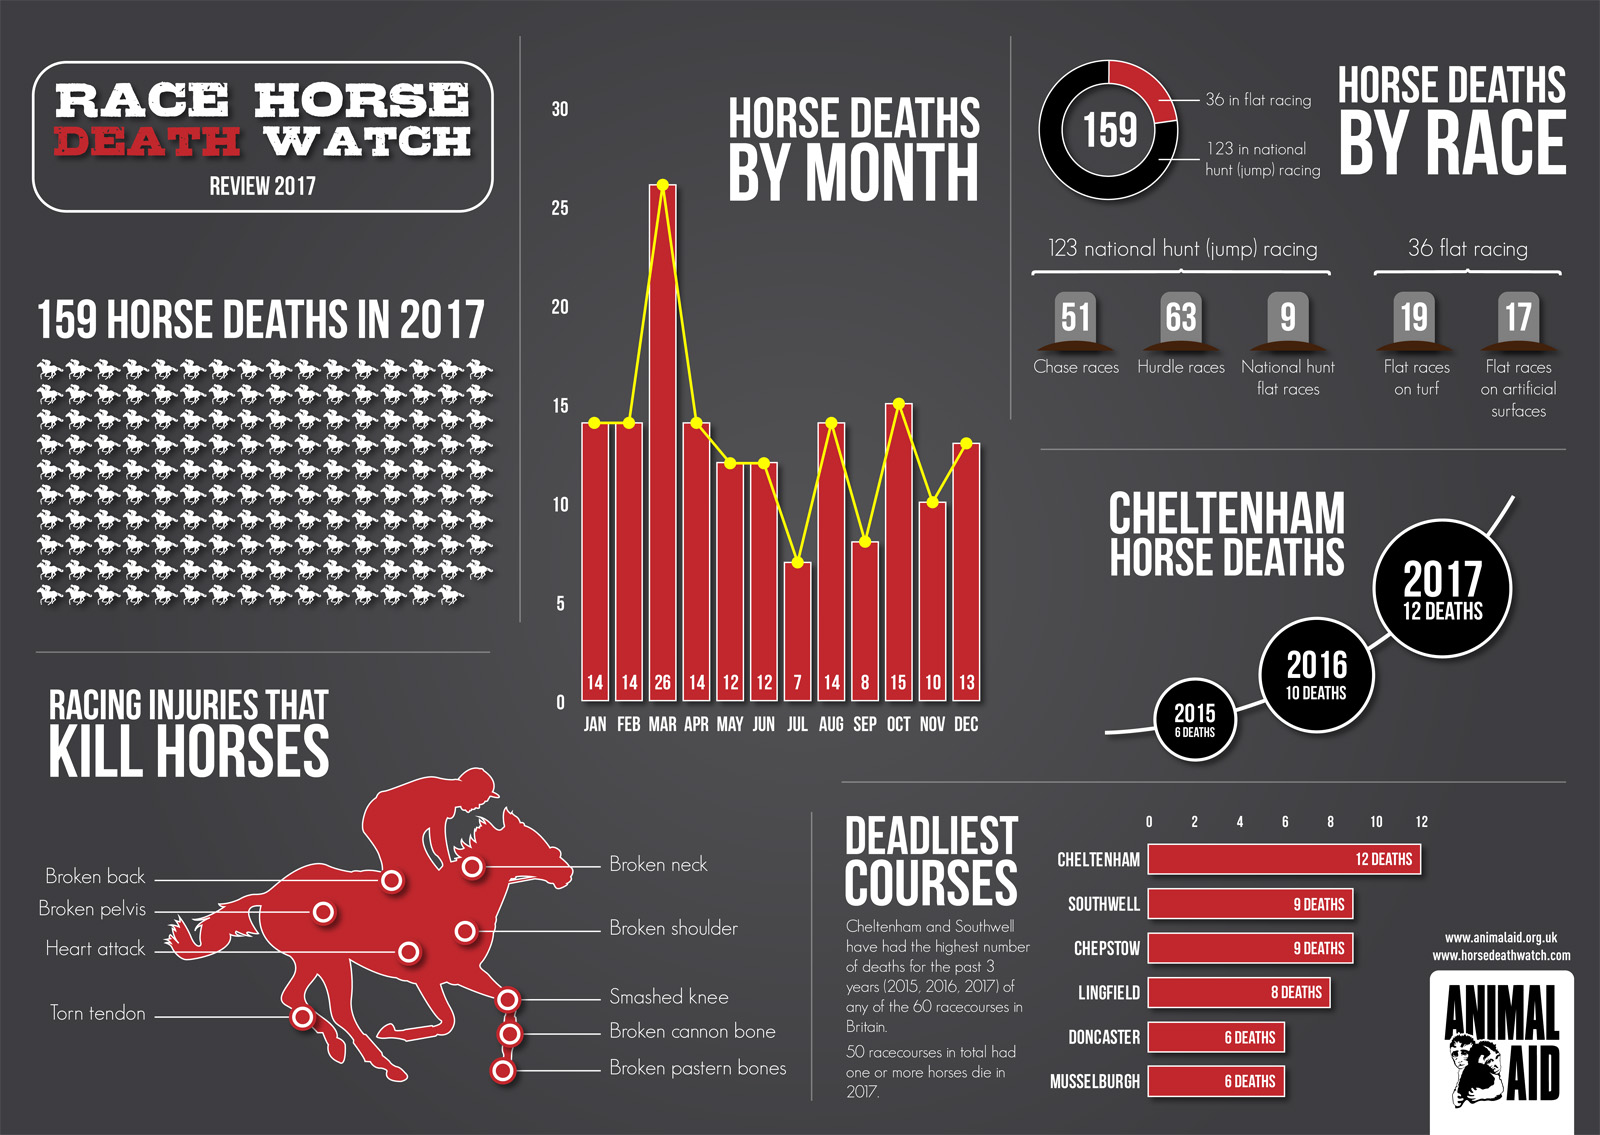 Increase in race horse deaths recorded by Animal Aid Animal Aid